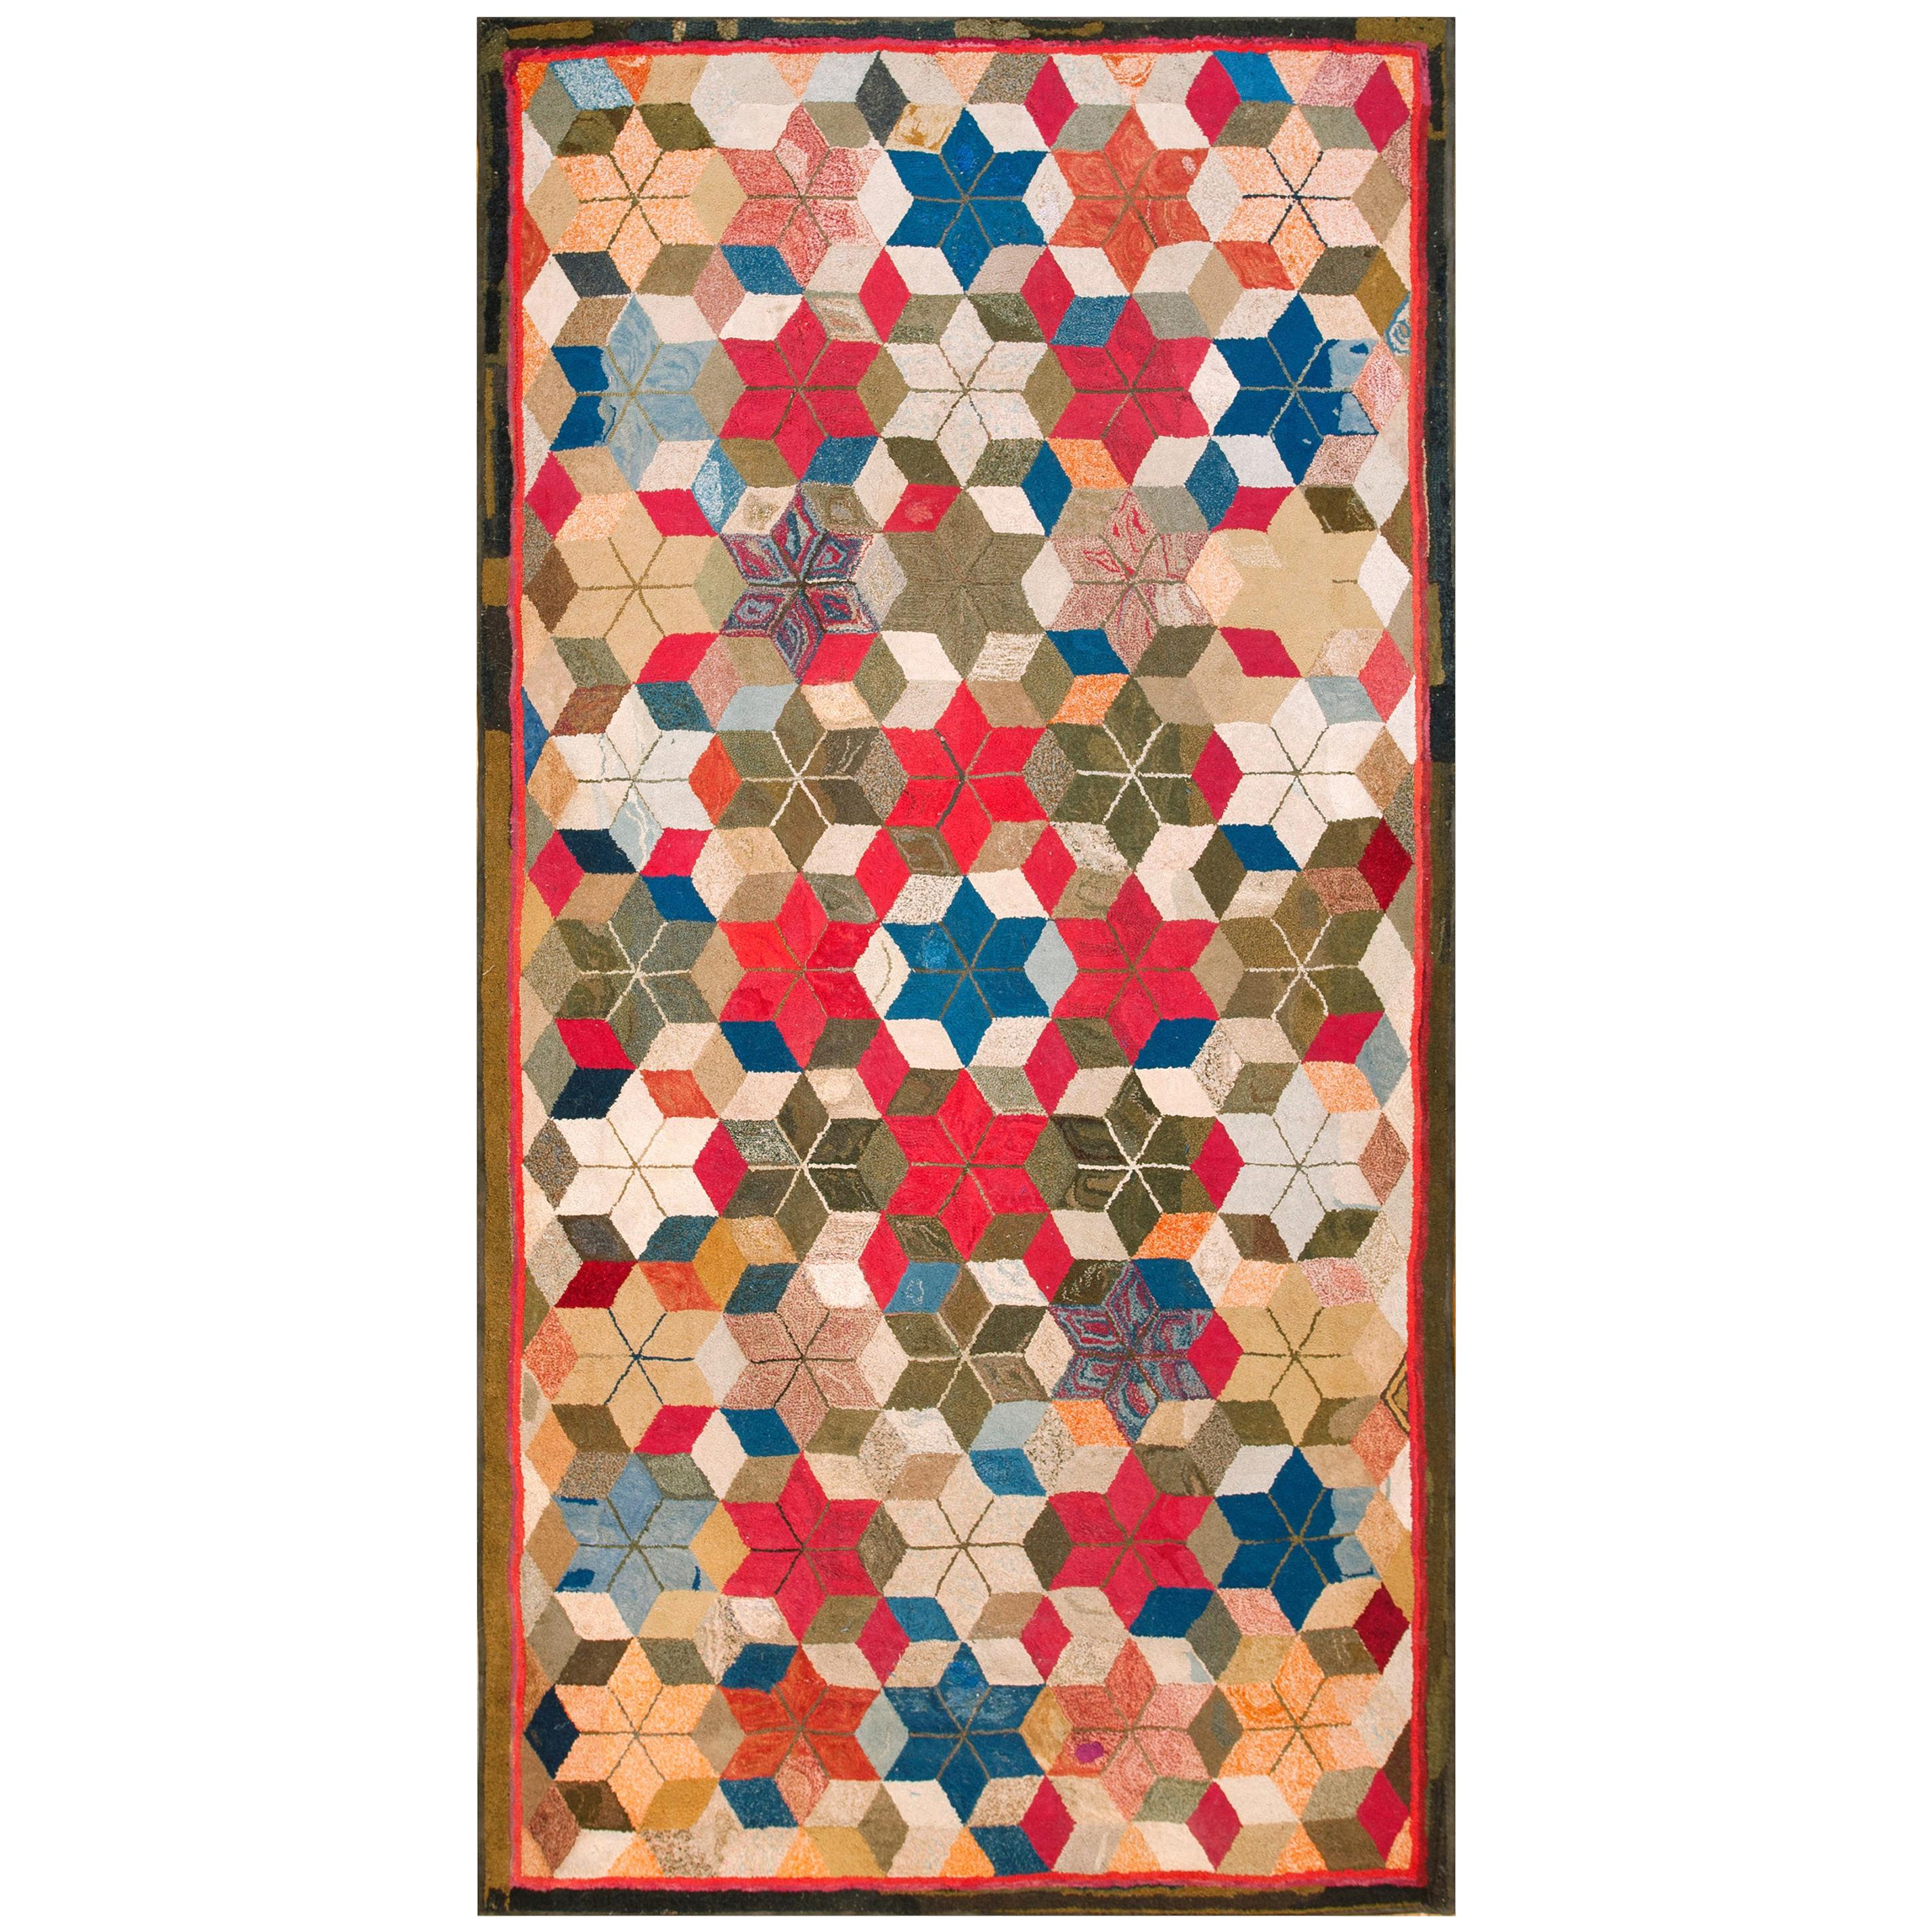 Antique American Hooked Rug 5' 8" x 11' 0" For Sale